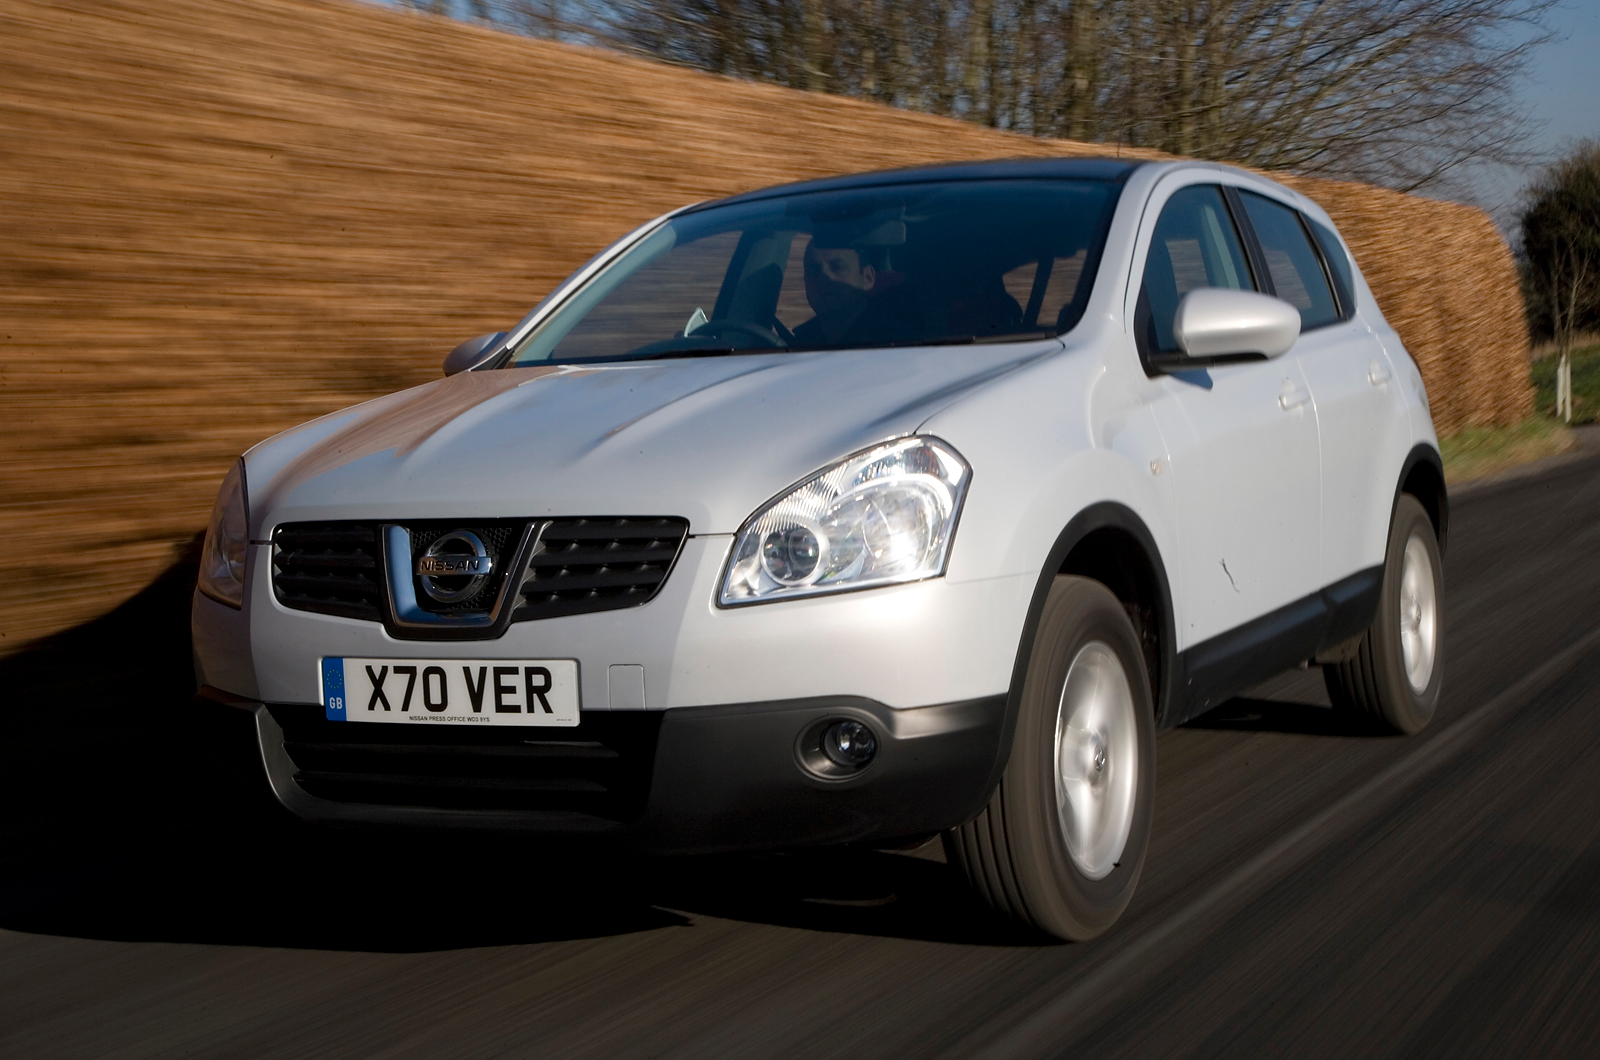 Used Nissan Qashqai (Mk1, 2007-2013) review - pictures